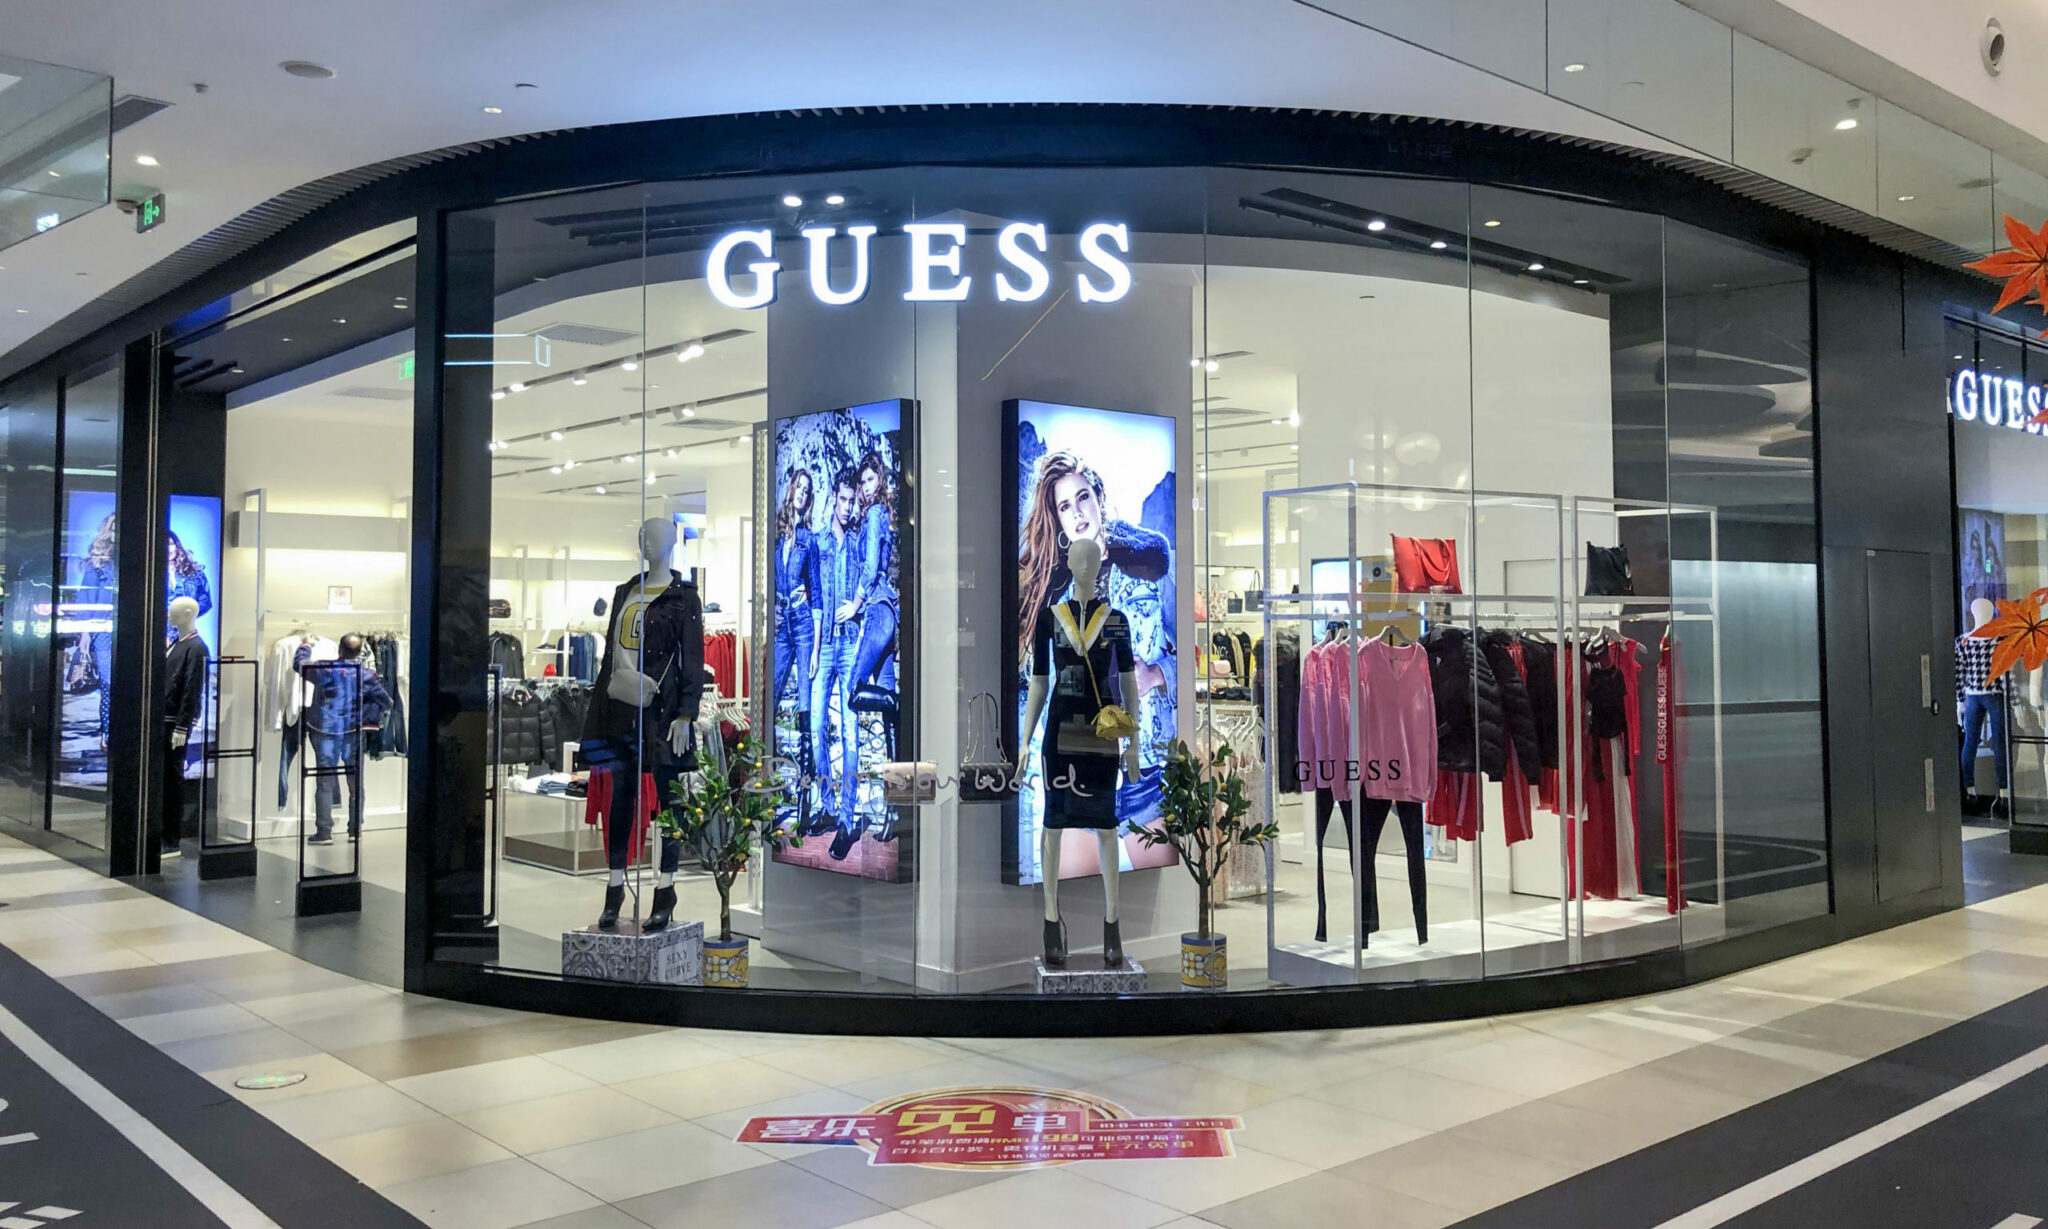 Fashion brand Guess hacked, DarkSide ransomware group the likely culprit